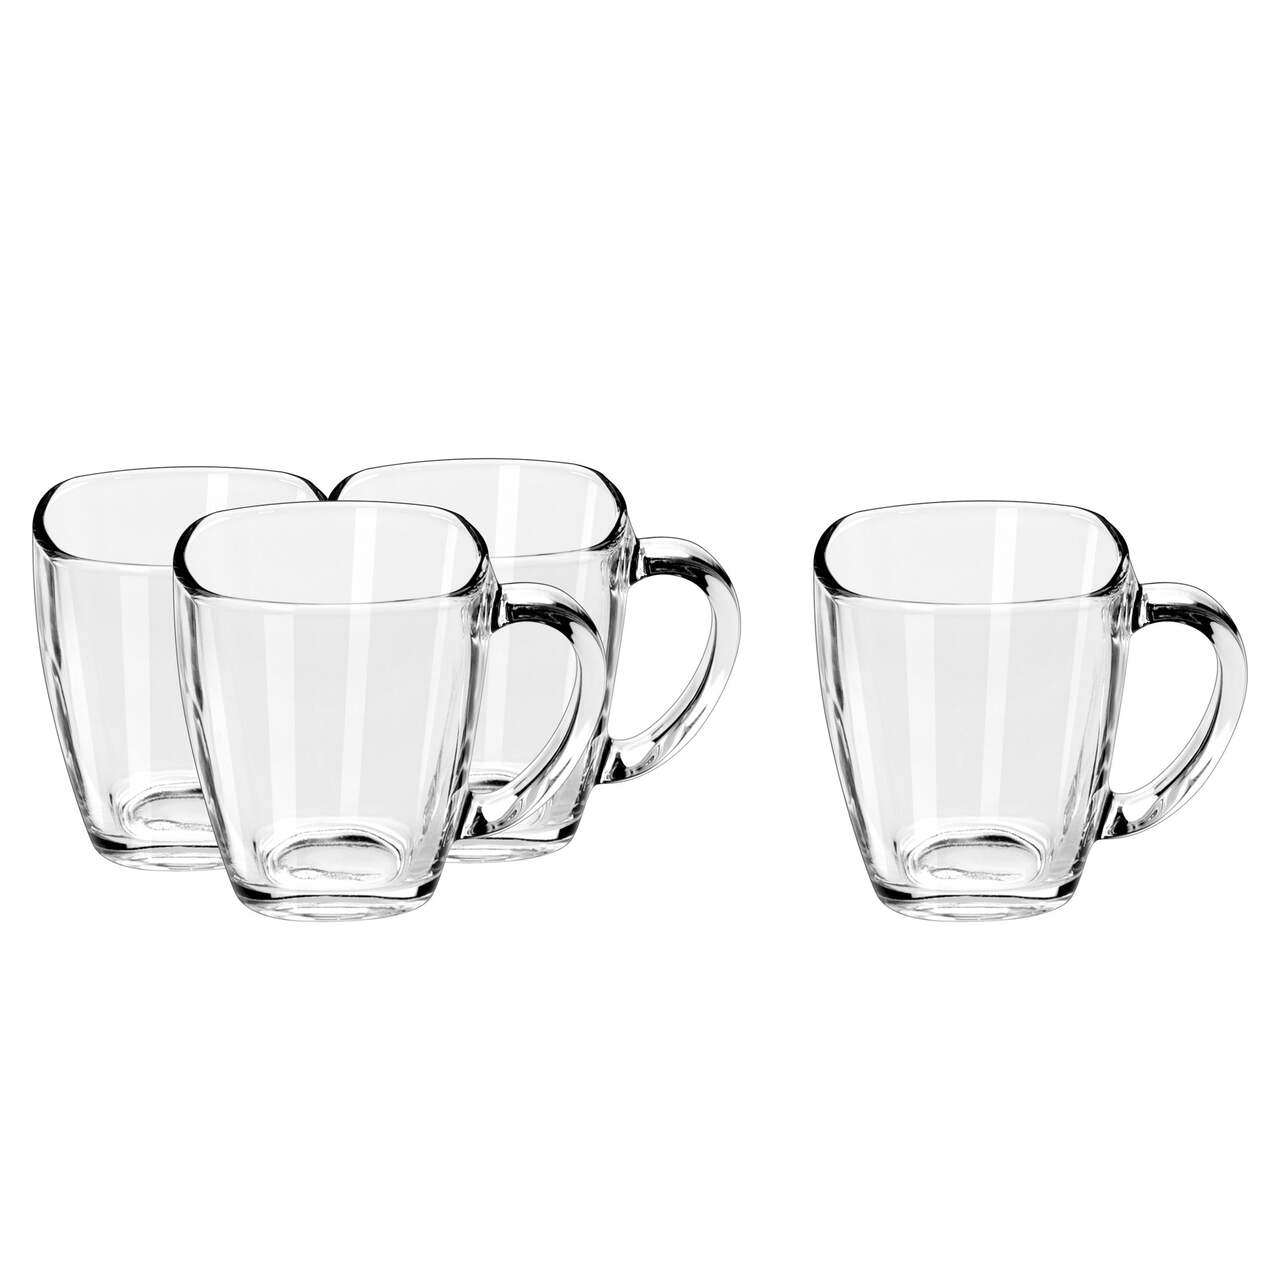 https://media-www.canadiantire.ca/product/living/kitchen/dining-and-entertaining/1426851/libbey-4pc-square-mug-a4eb5e49-6a09-4ff5-9519-d1895b9e8406-jpgrendition.jpg?imdensity=1&imwidth=640&impolicy=mZoom